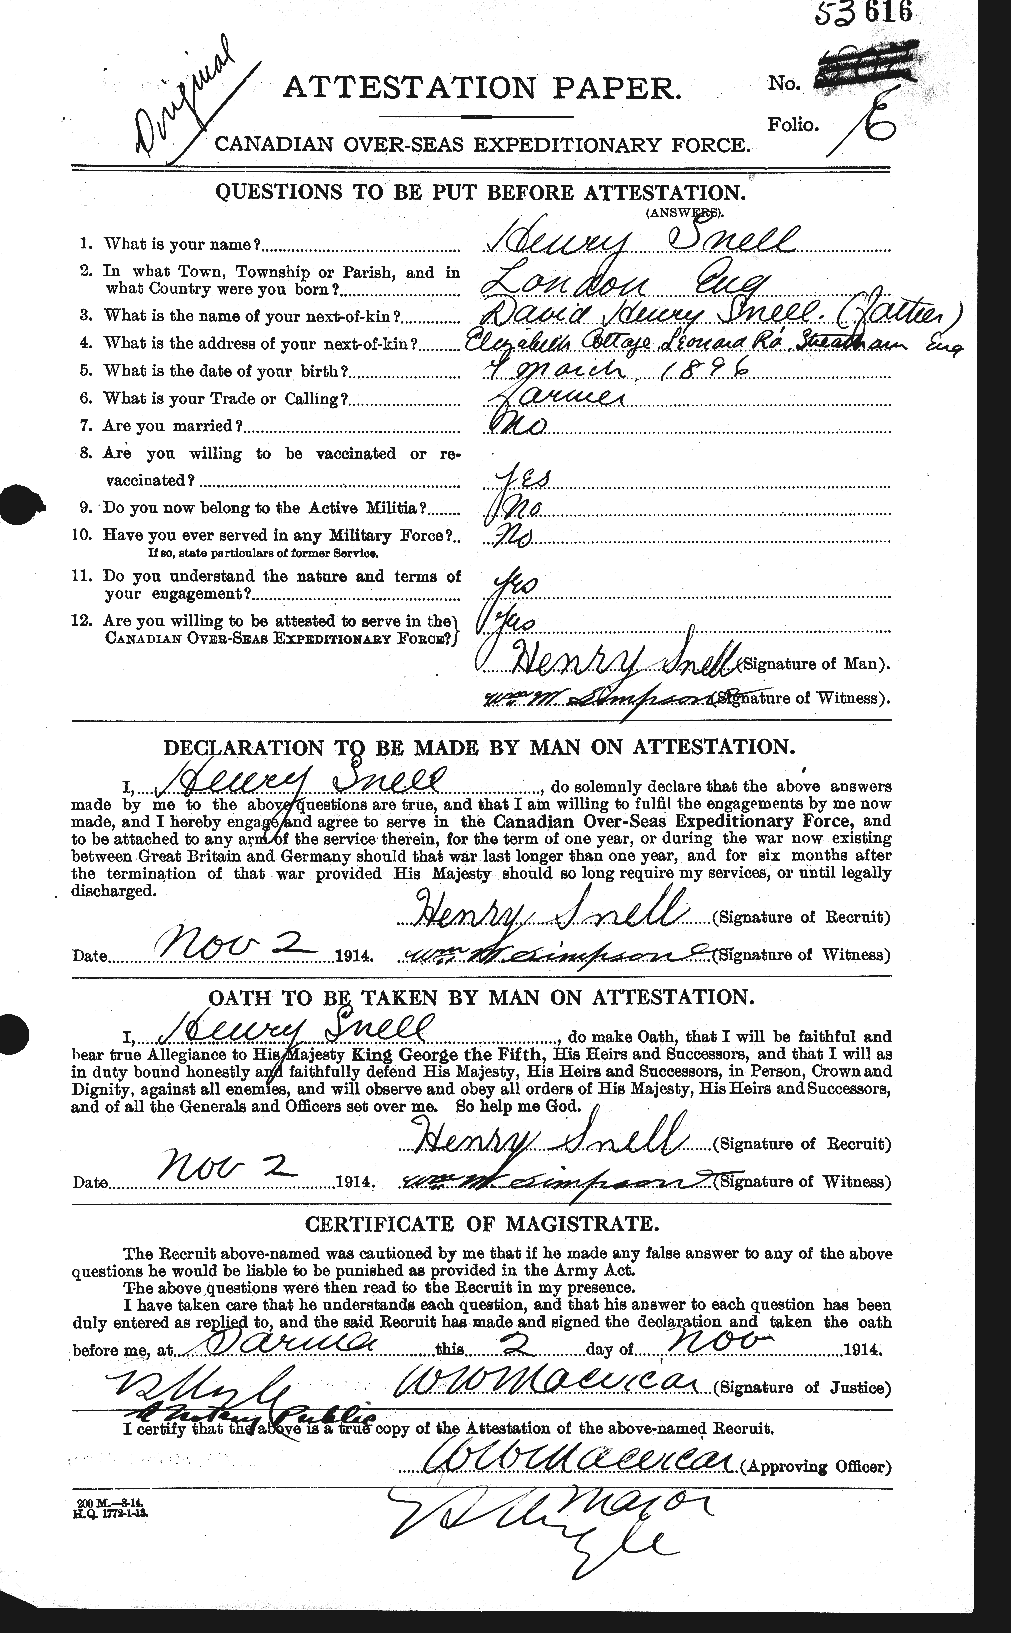 Personnel Records of the First World War - CEF 110778a